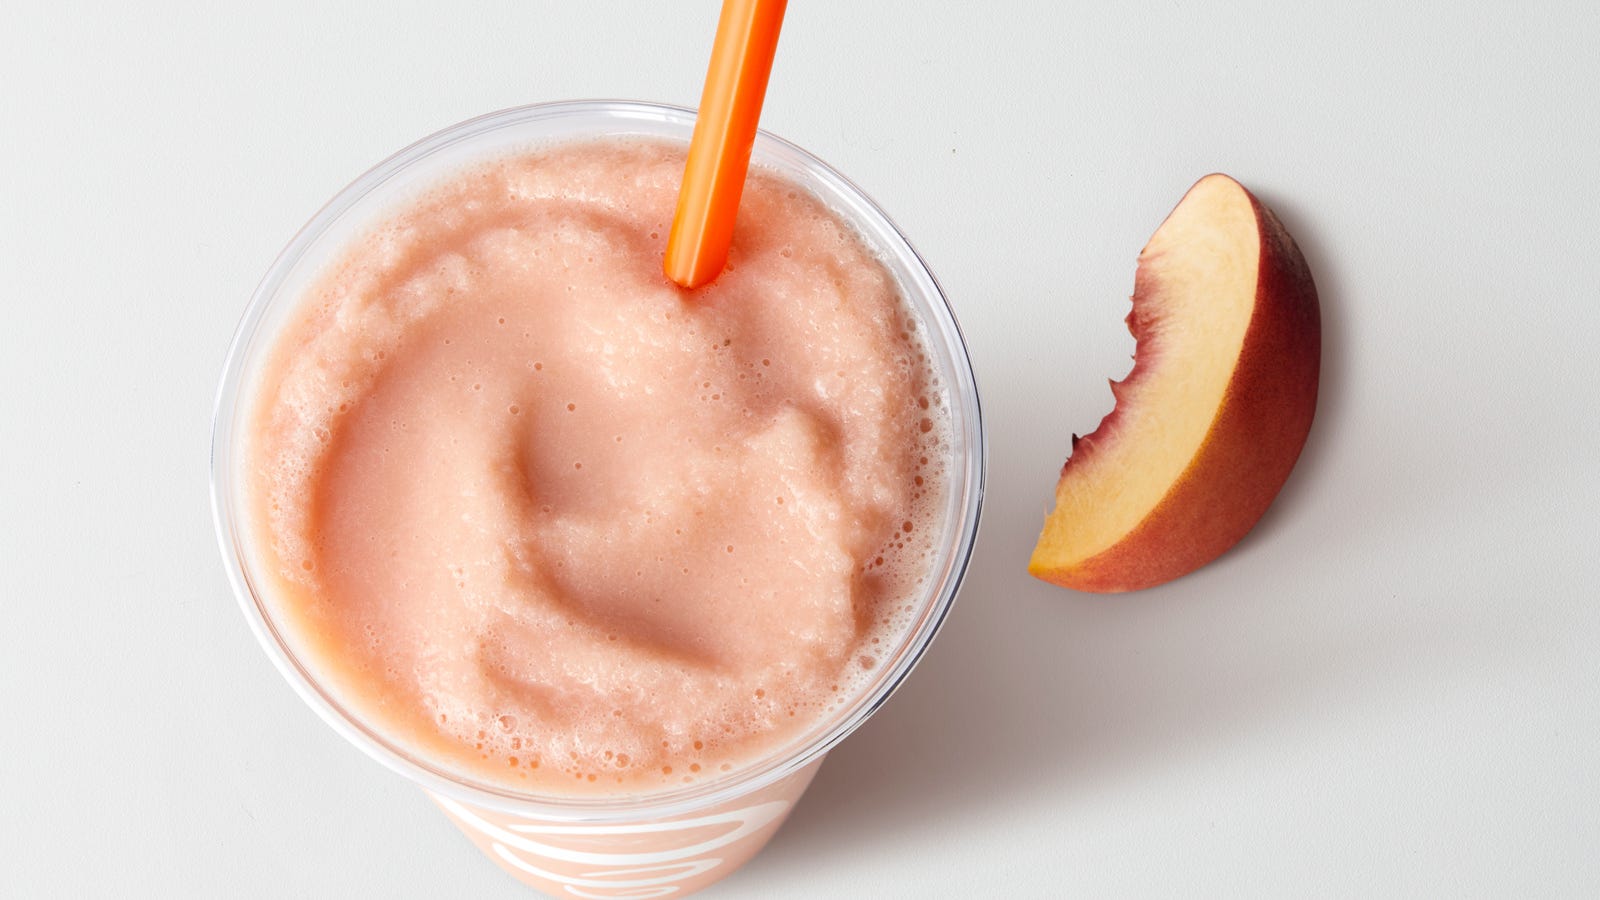 Get a Free Smoothie From Jamba Juice This Afternoon